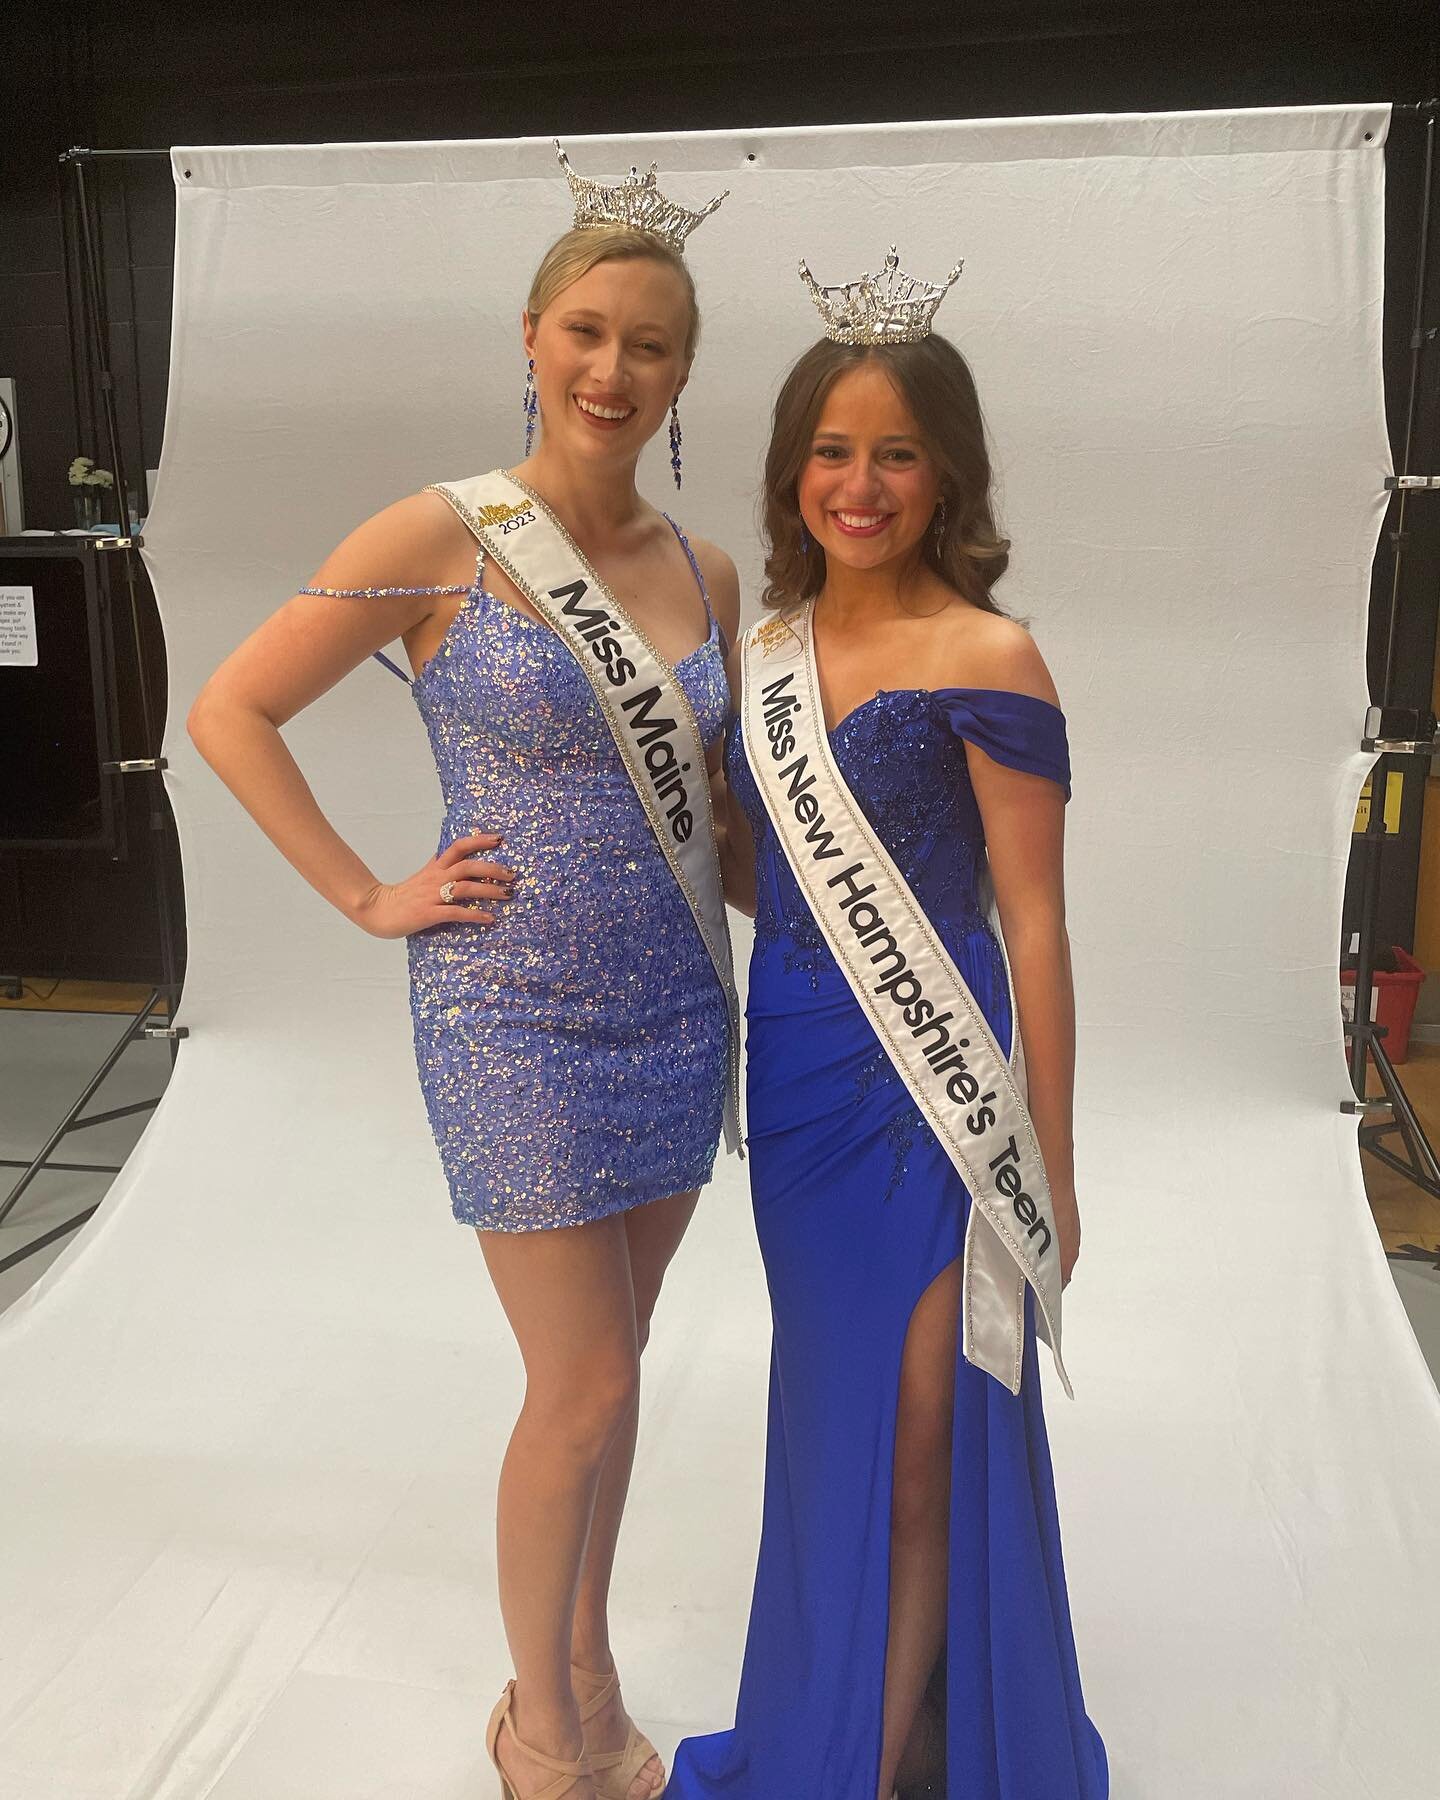 We have a new Miss New Hampshire&rsquo;s Teen!!! 

Congratulations Kylie on an incredible performance, and congrats to Siena on an amazing year! You are both such accomplished young women and I know the future holds wonderful things for you. @missame